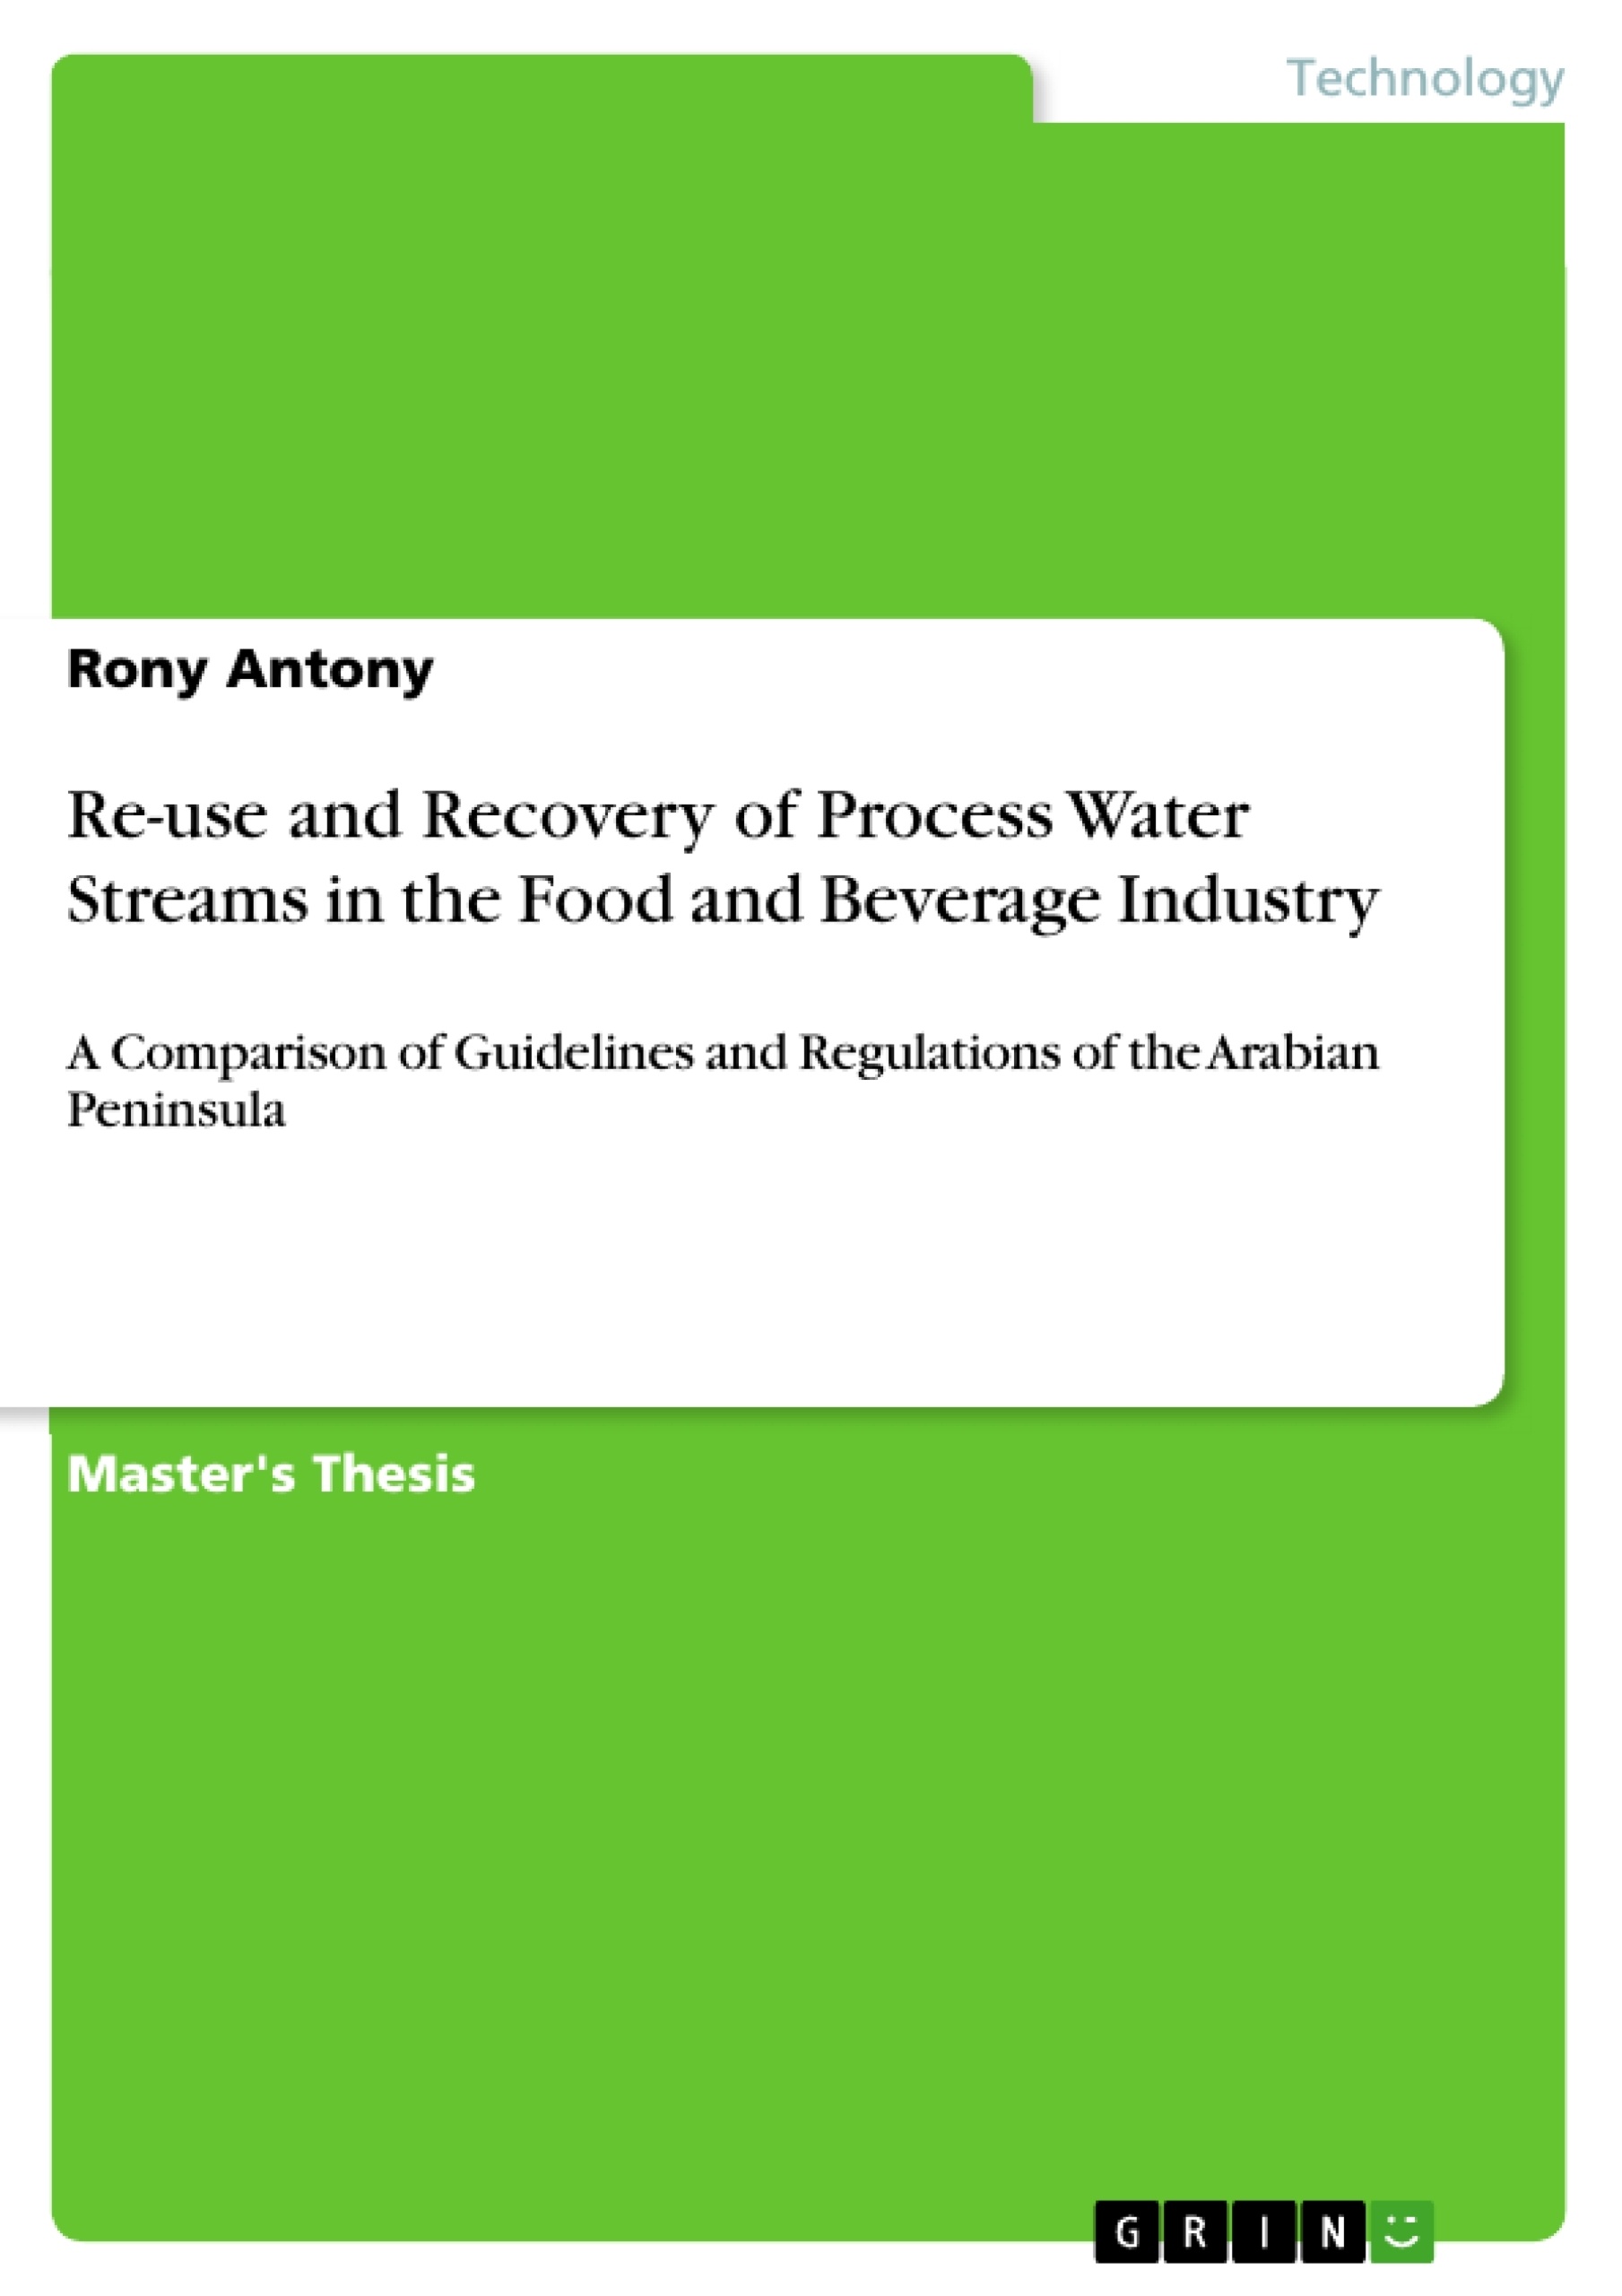 Título: Re-use and Recovery of Process Water Streams in the Food and Beverage Industry